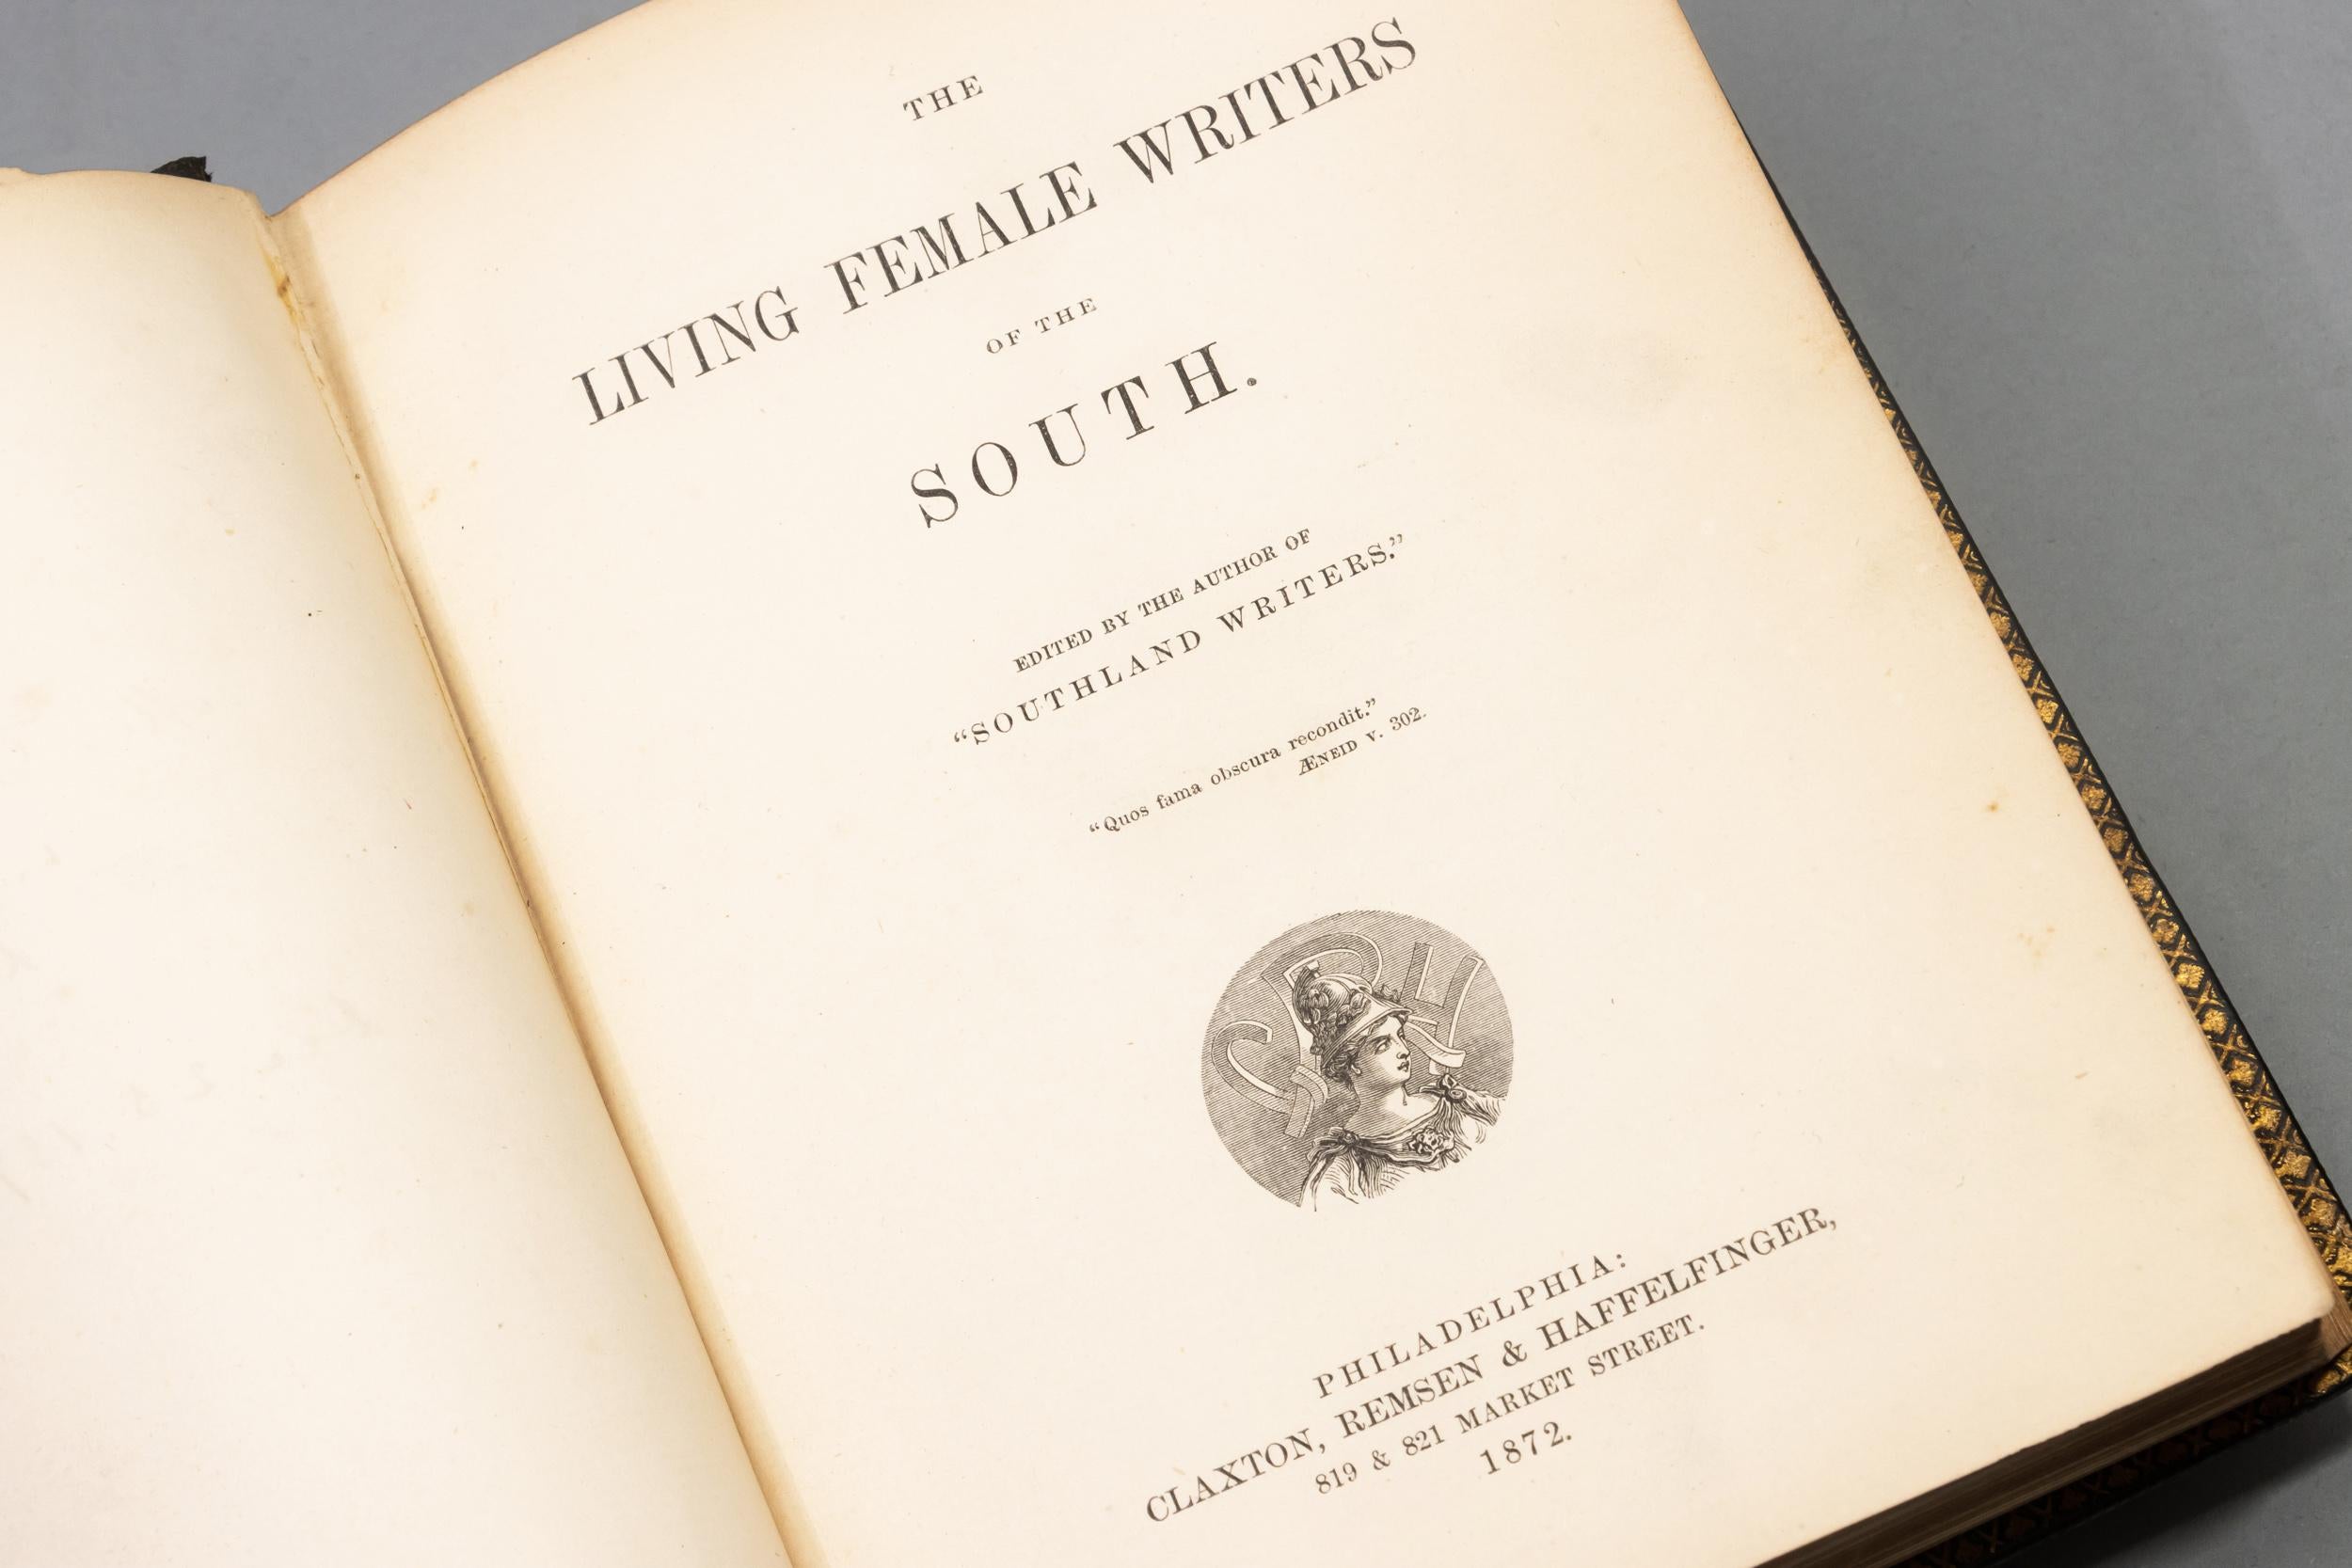 American 1 Volume, Anon, the Living Female Writers of the South